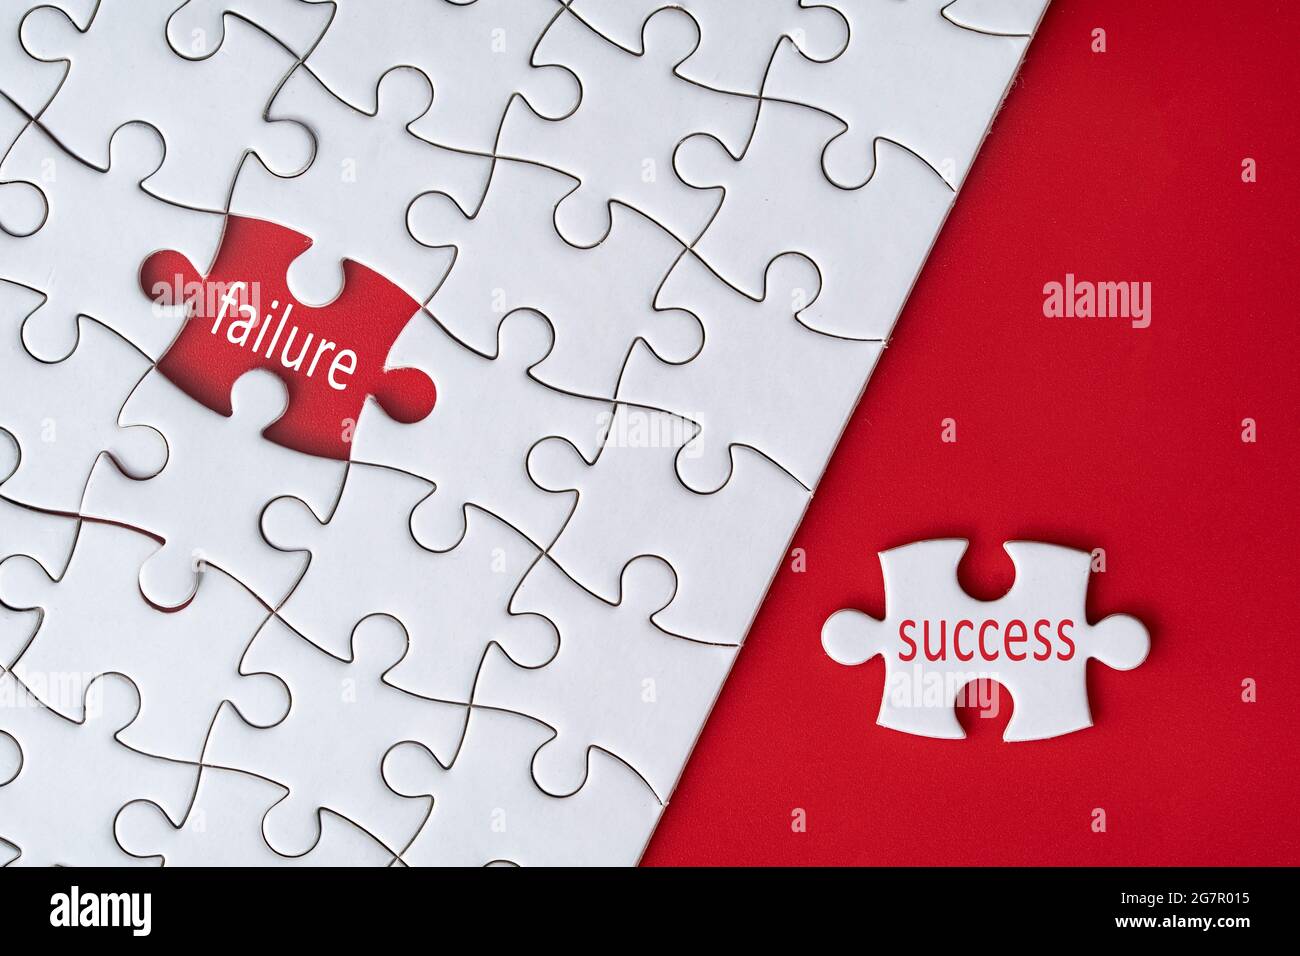 Business concept. Jigsaw puzzle with text failure and success on red background. Selective focus point Stock Photo